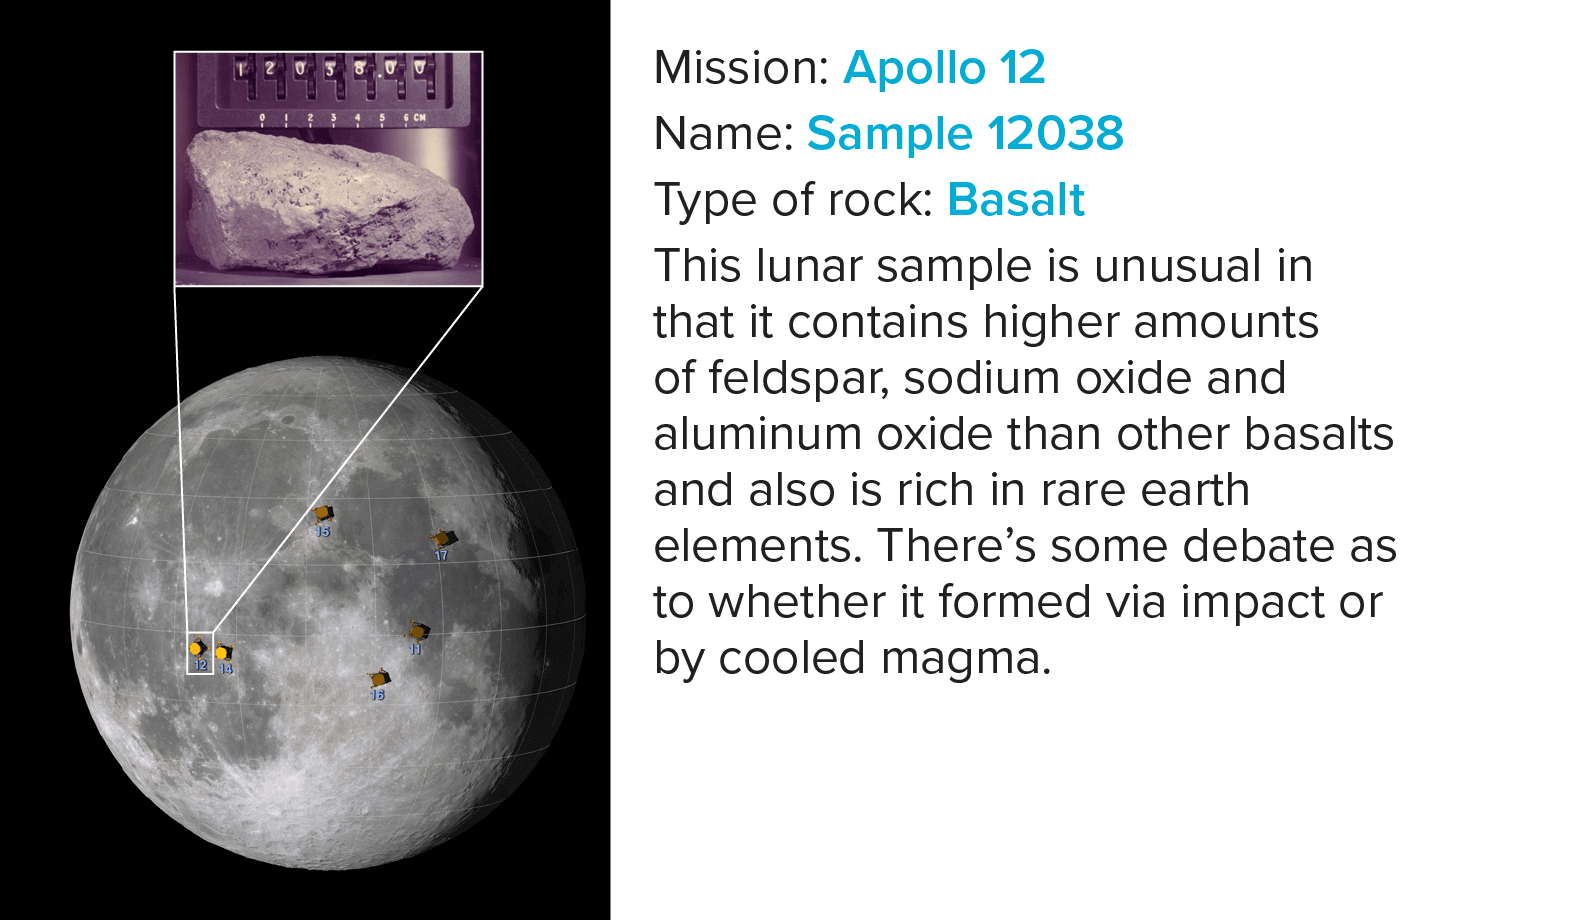 This lunar sample is unusual in that it contains higher amounts of feldspar, sodium oxide and aluminum oxide than other basalts and also is rich in rare earth elements. There’s some debate as to whether it formed via impact or by cooled magma. 